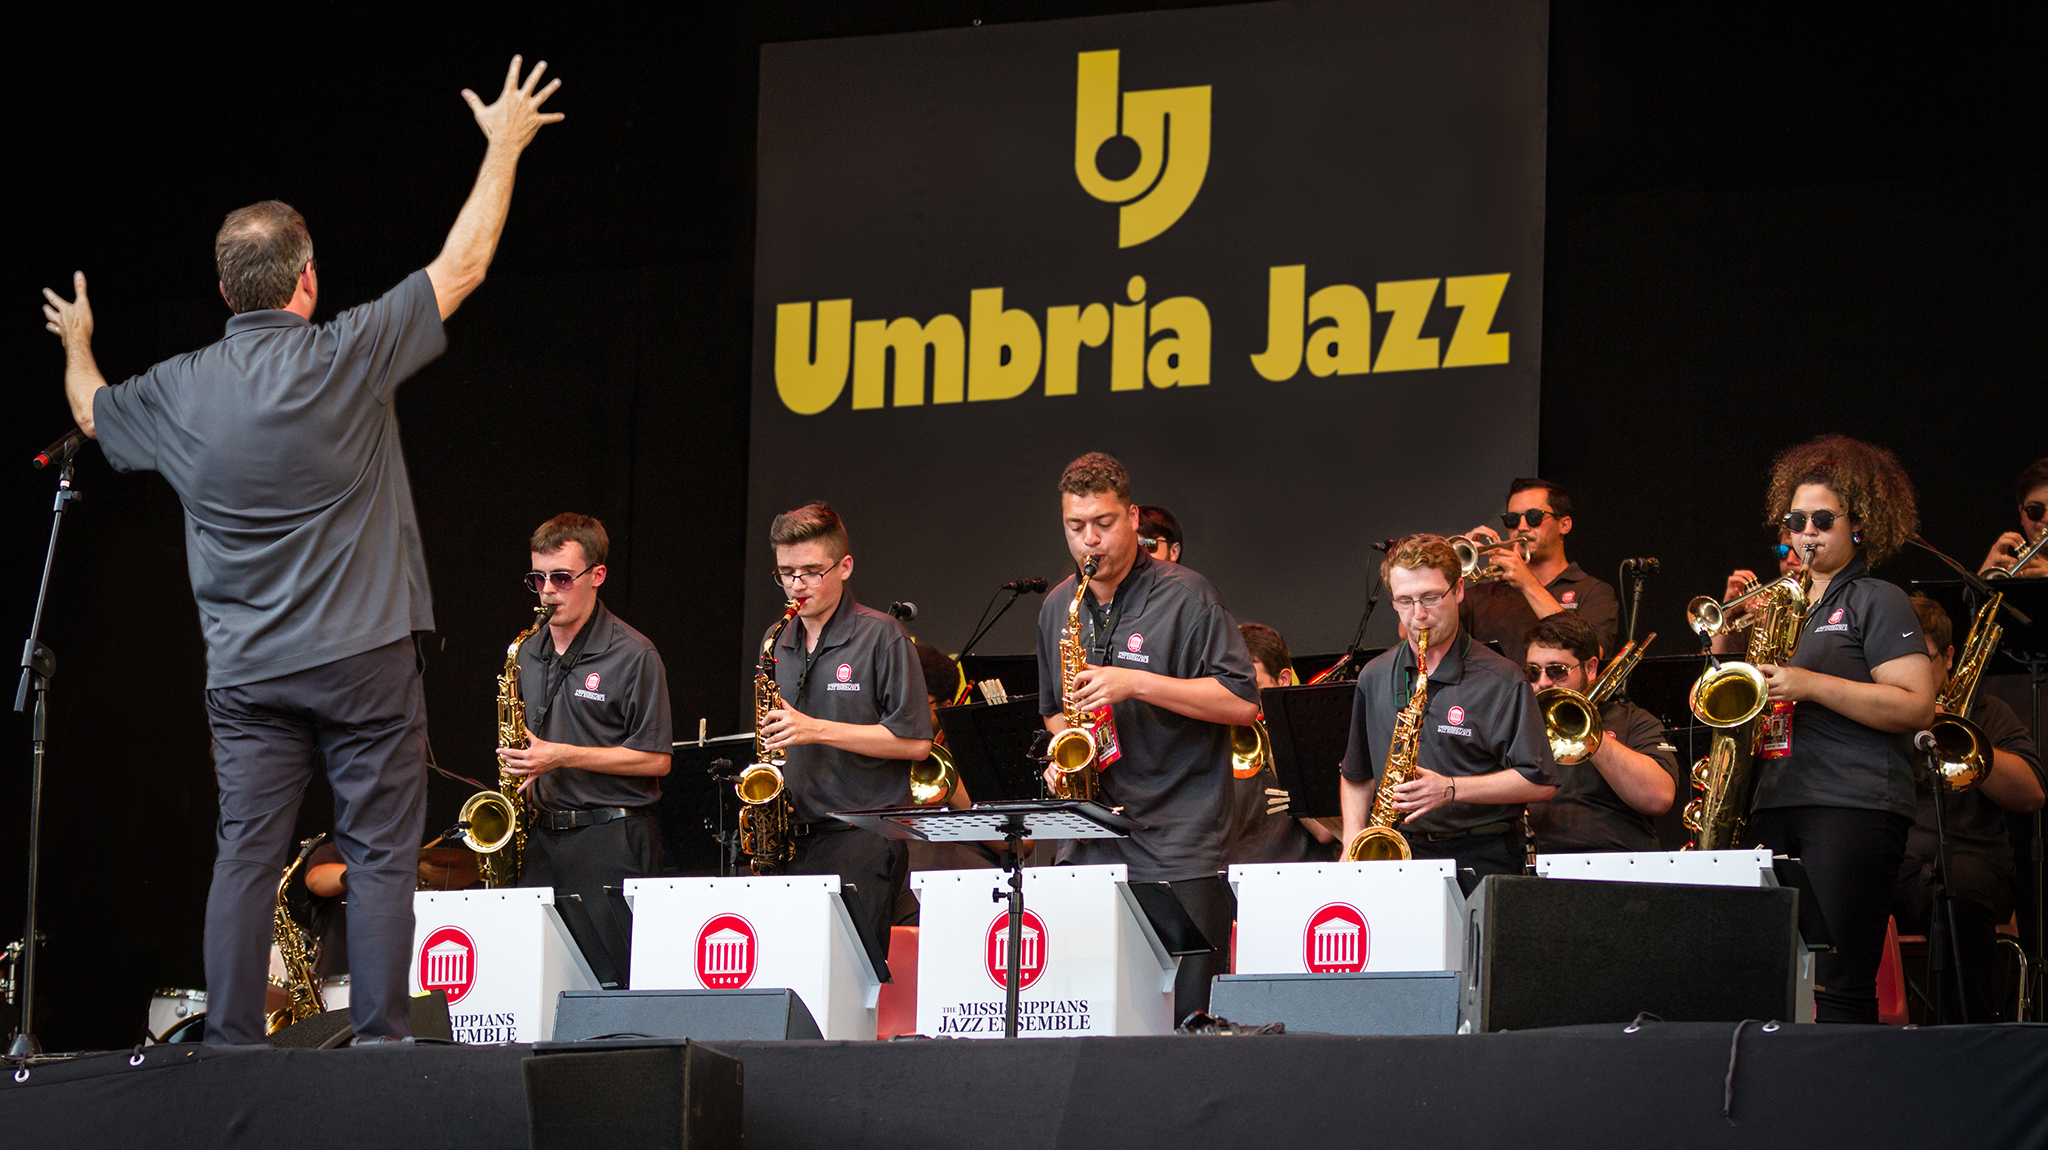 The Mississippians jazz ensemble performs in 2018 at the Umbria Jazz Festival in Perugia, Italy. Celebrating its centennial at the university, the student ensemble returns to Europe in July to play at three renowned music festivals. Photo by Mattia Alunni Cardinali